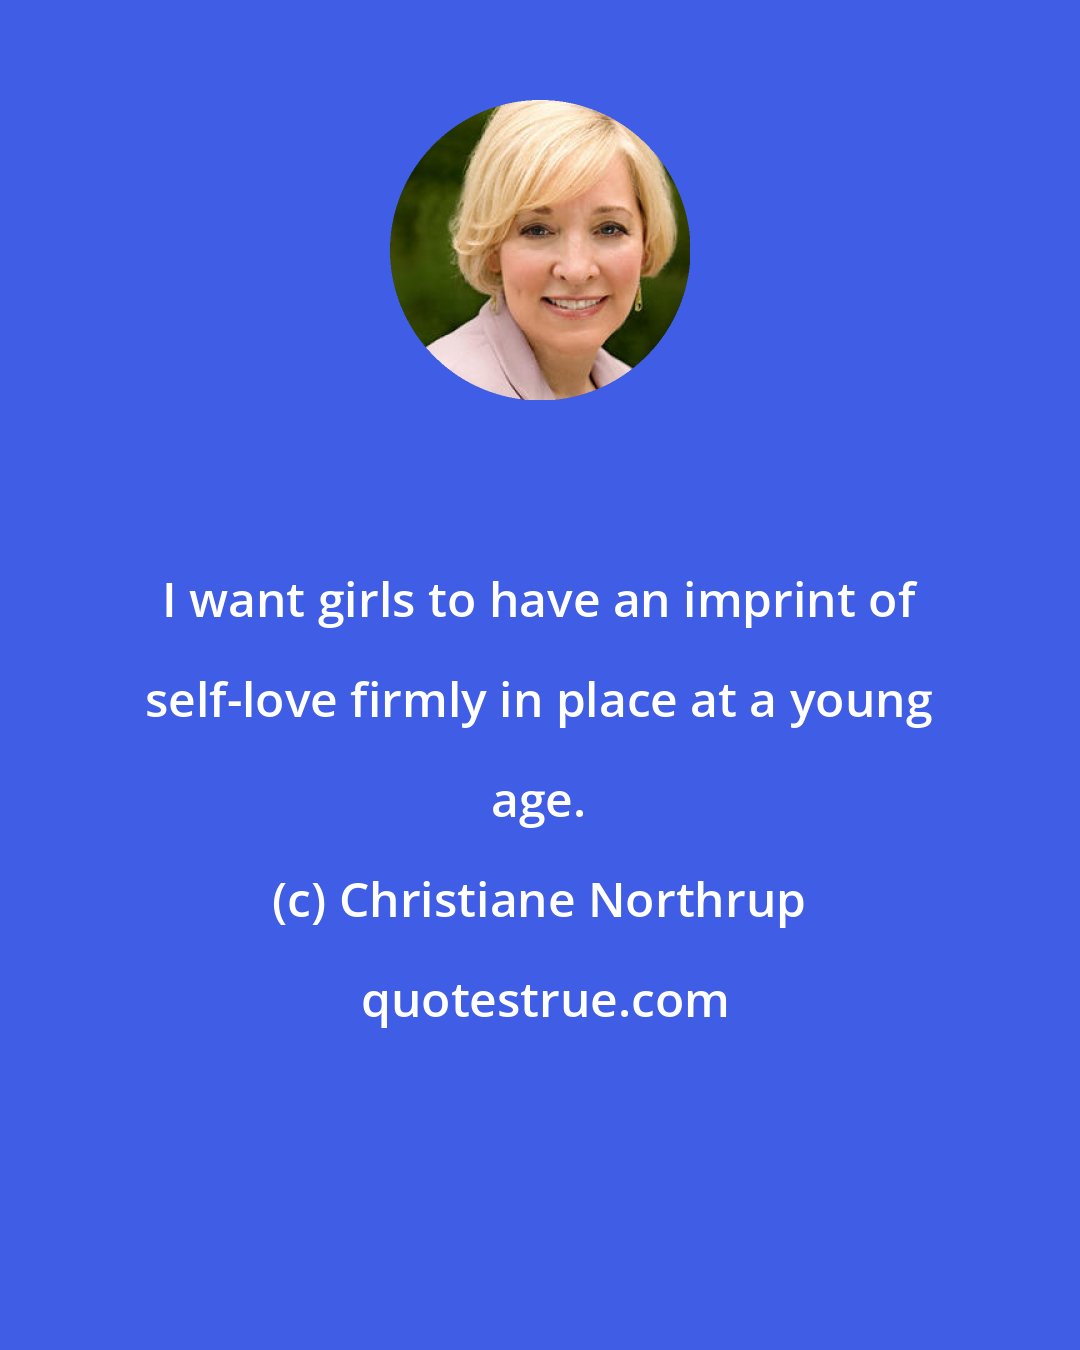 Christiane Northrup: I want girls to have an imprint of self-love firmly in place at a young age.